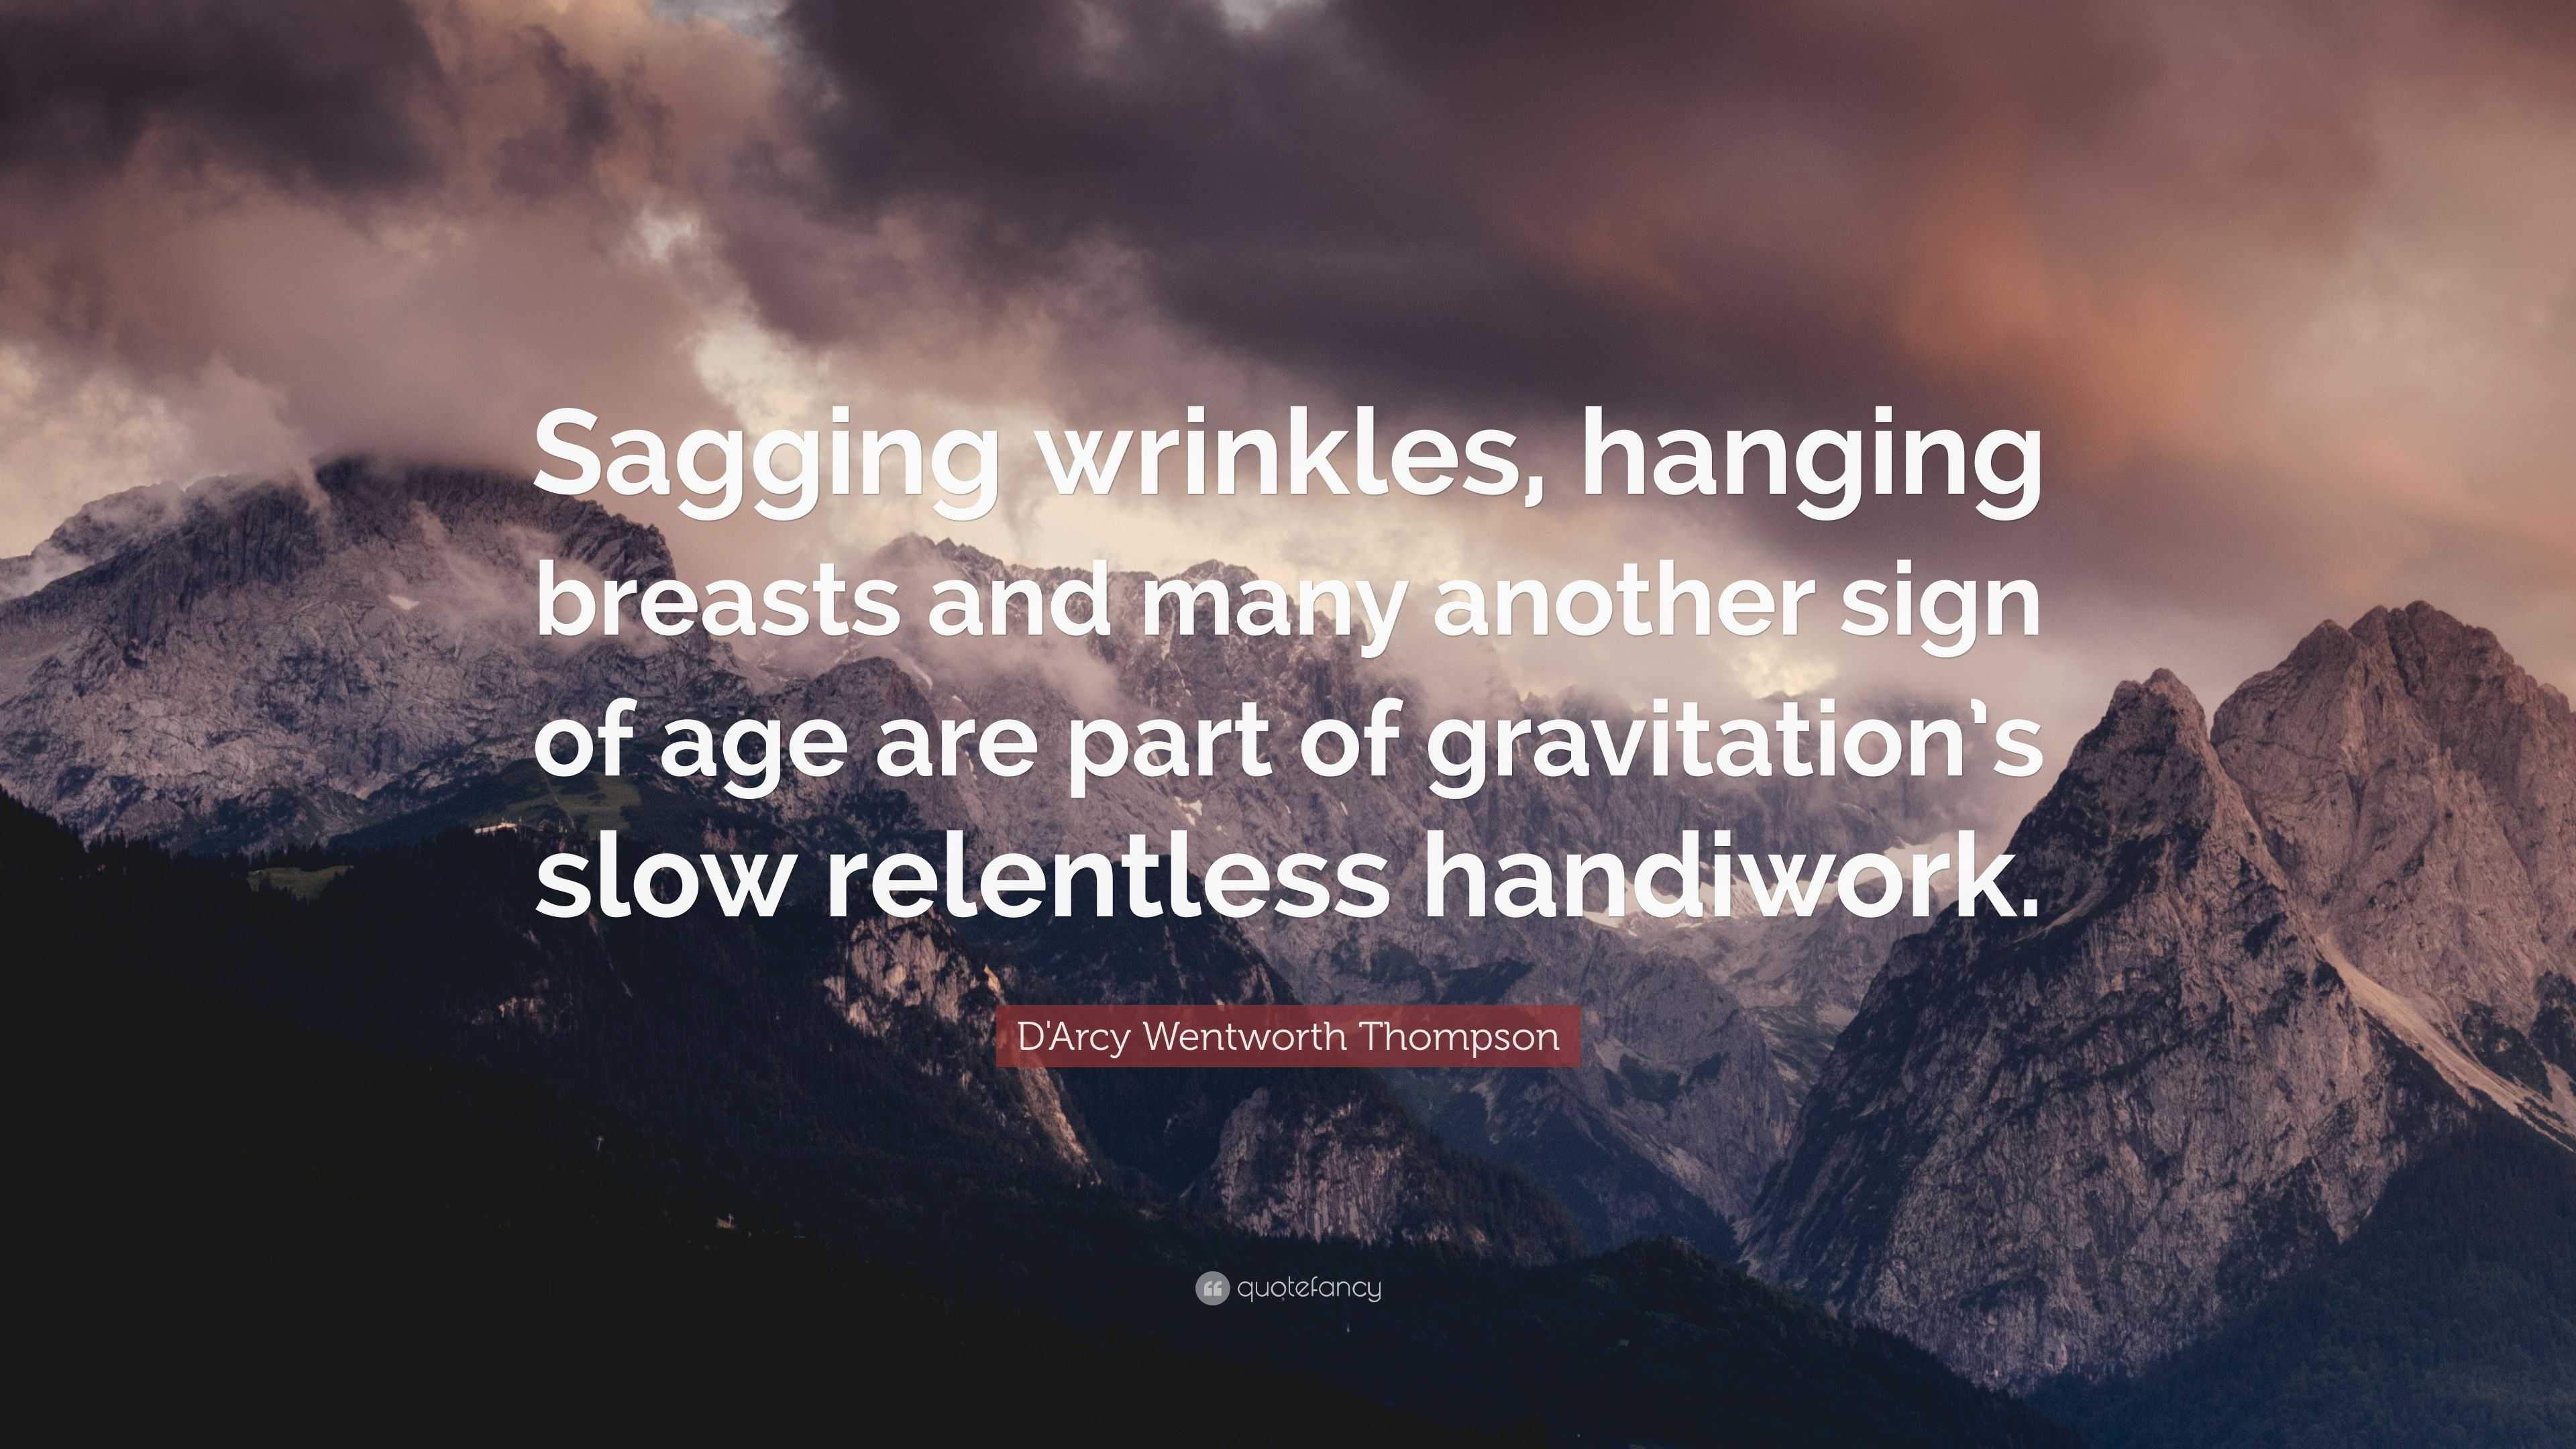 D'Arcy Wentworth Thompson quote: Sagging wrinkles, hanging breasts